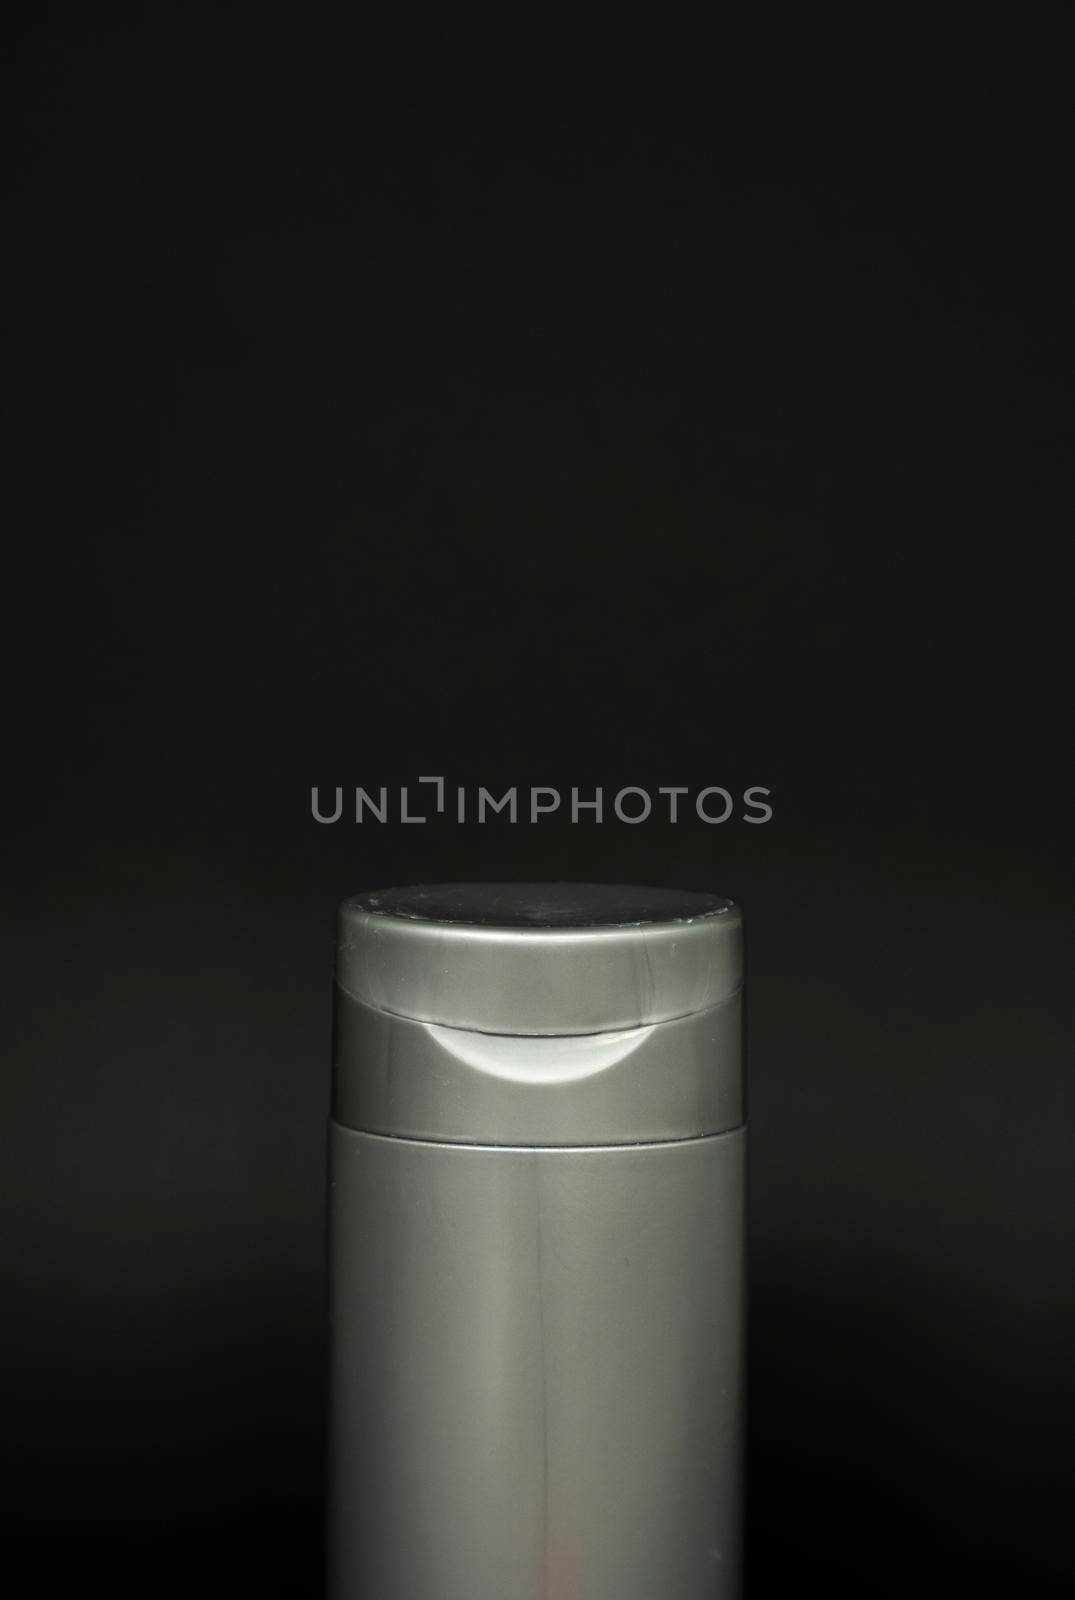 Black shampoo packaging mockup. Vertical empty plastic cosmetic package for man, isolated on black background. Container of conditioner, hair rinse